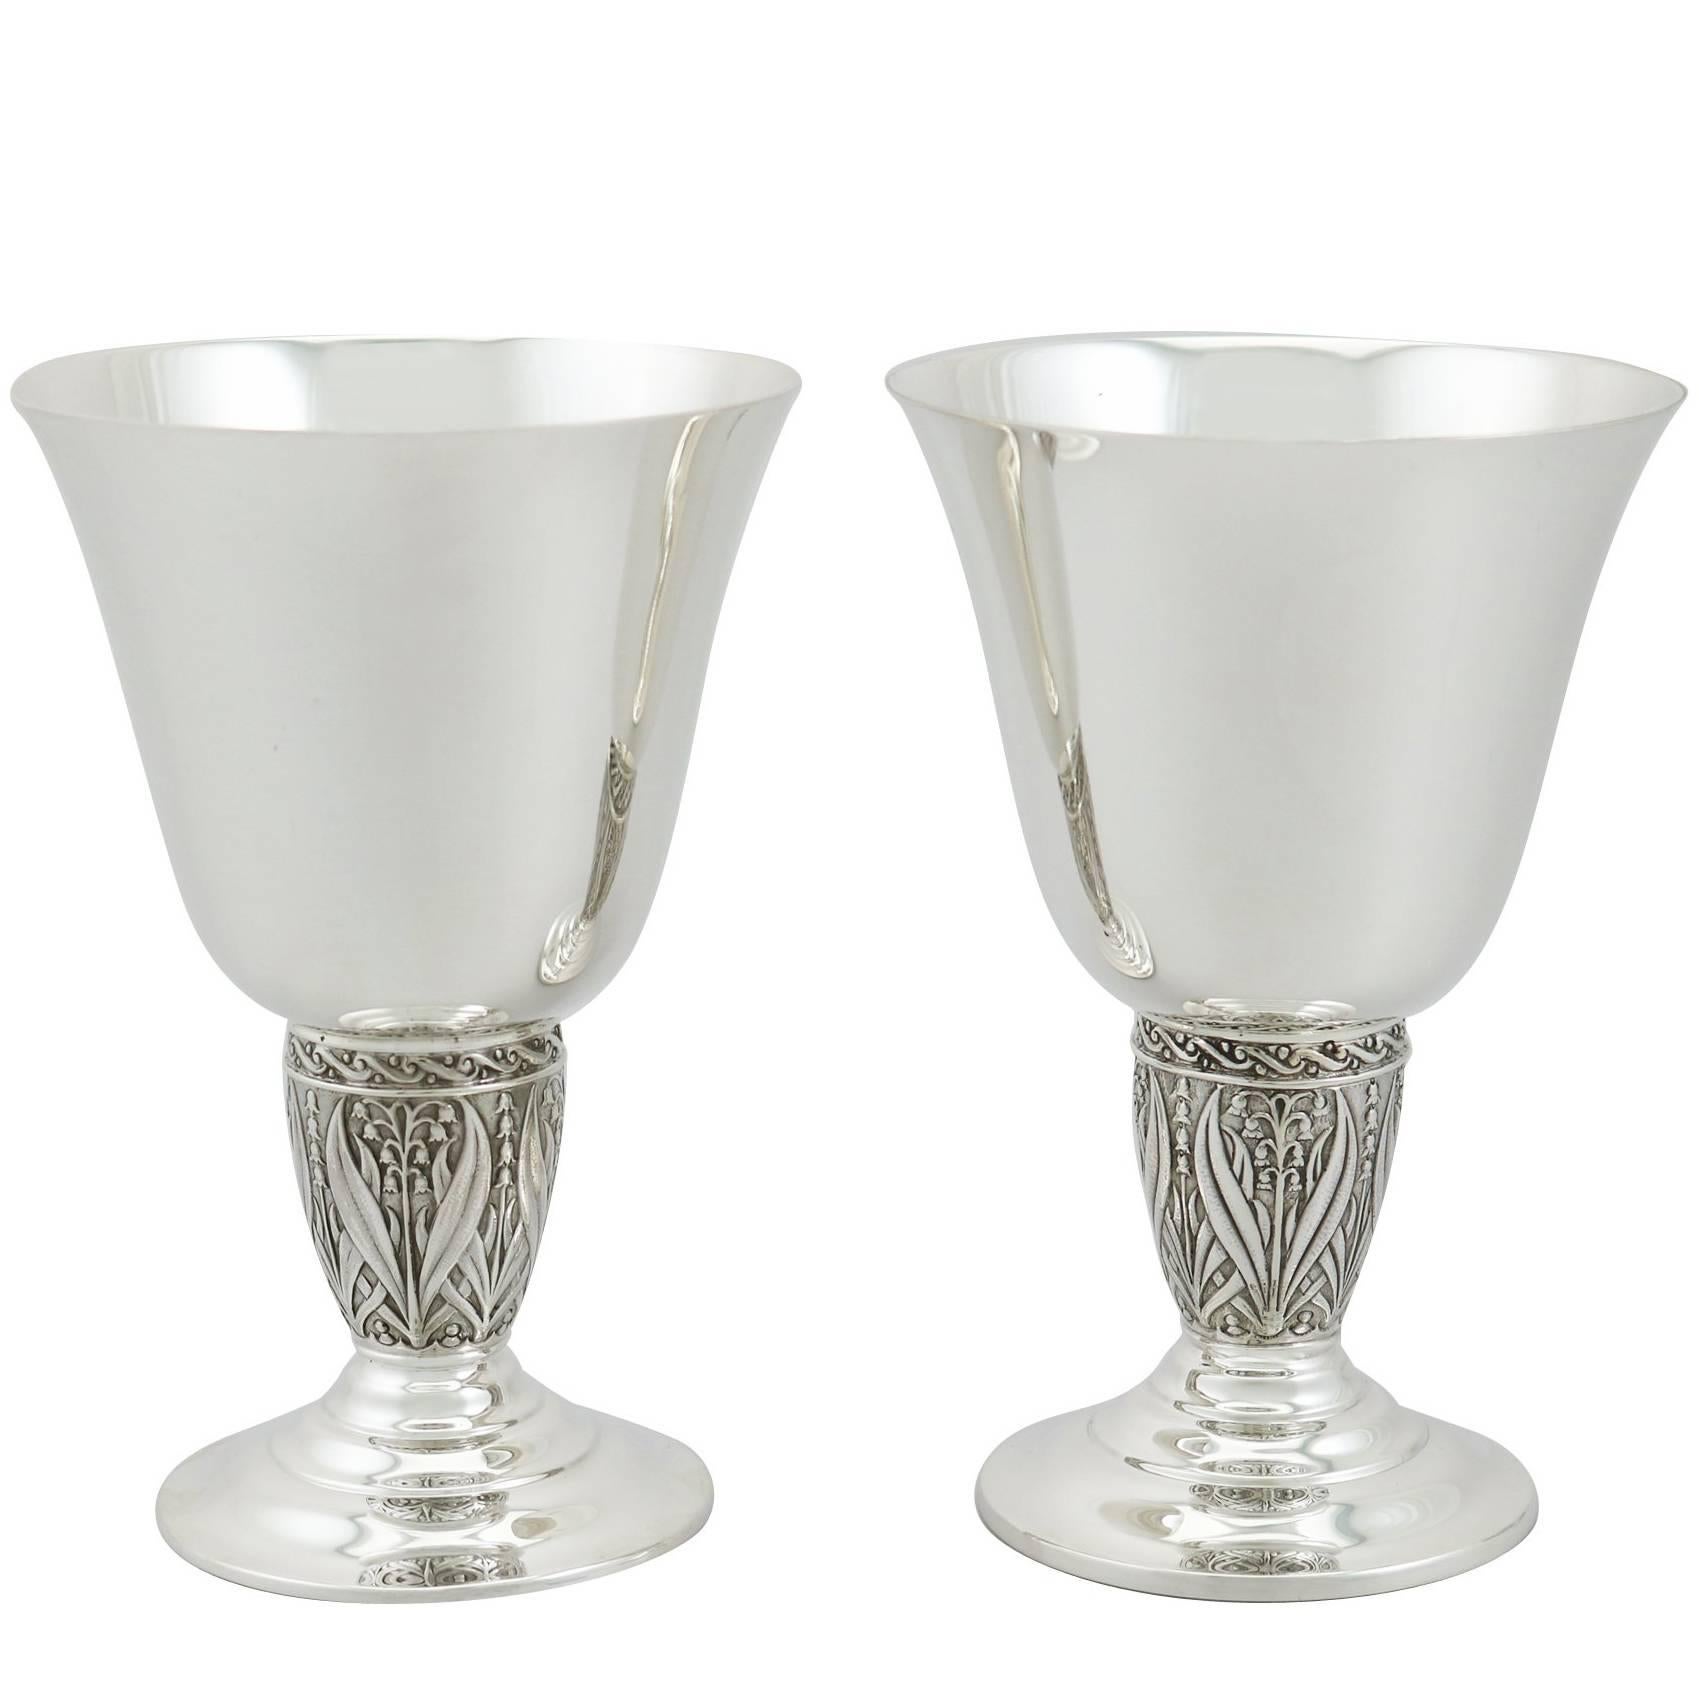 Vintage 1950s Pair of Sterling Silver Goblets